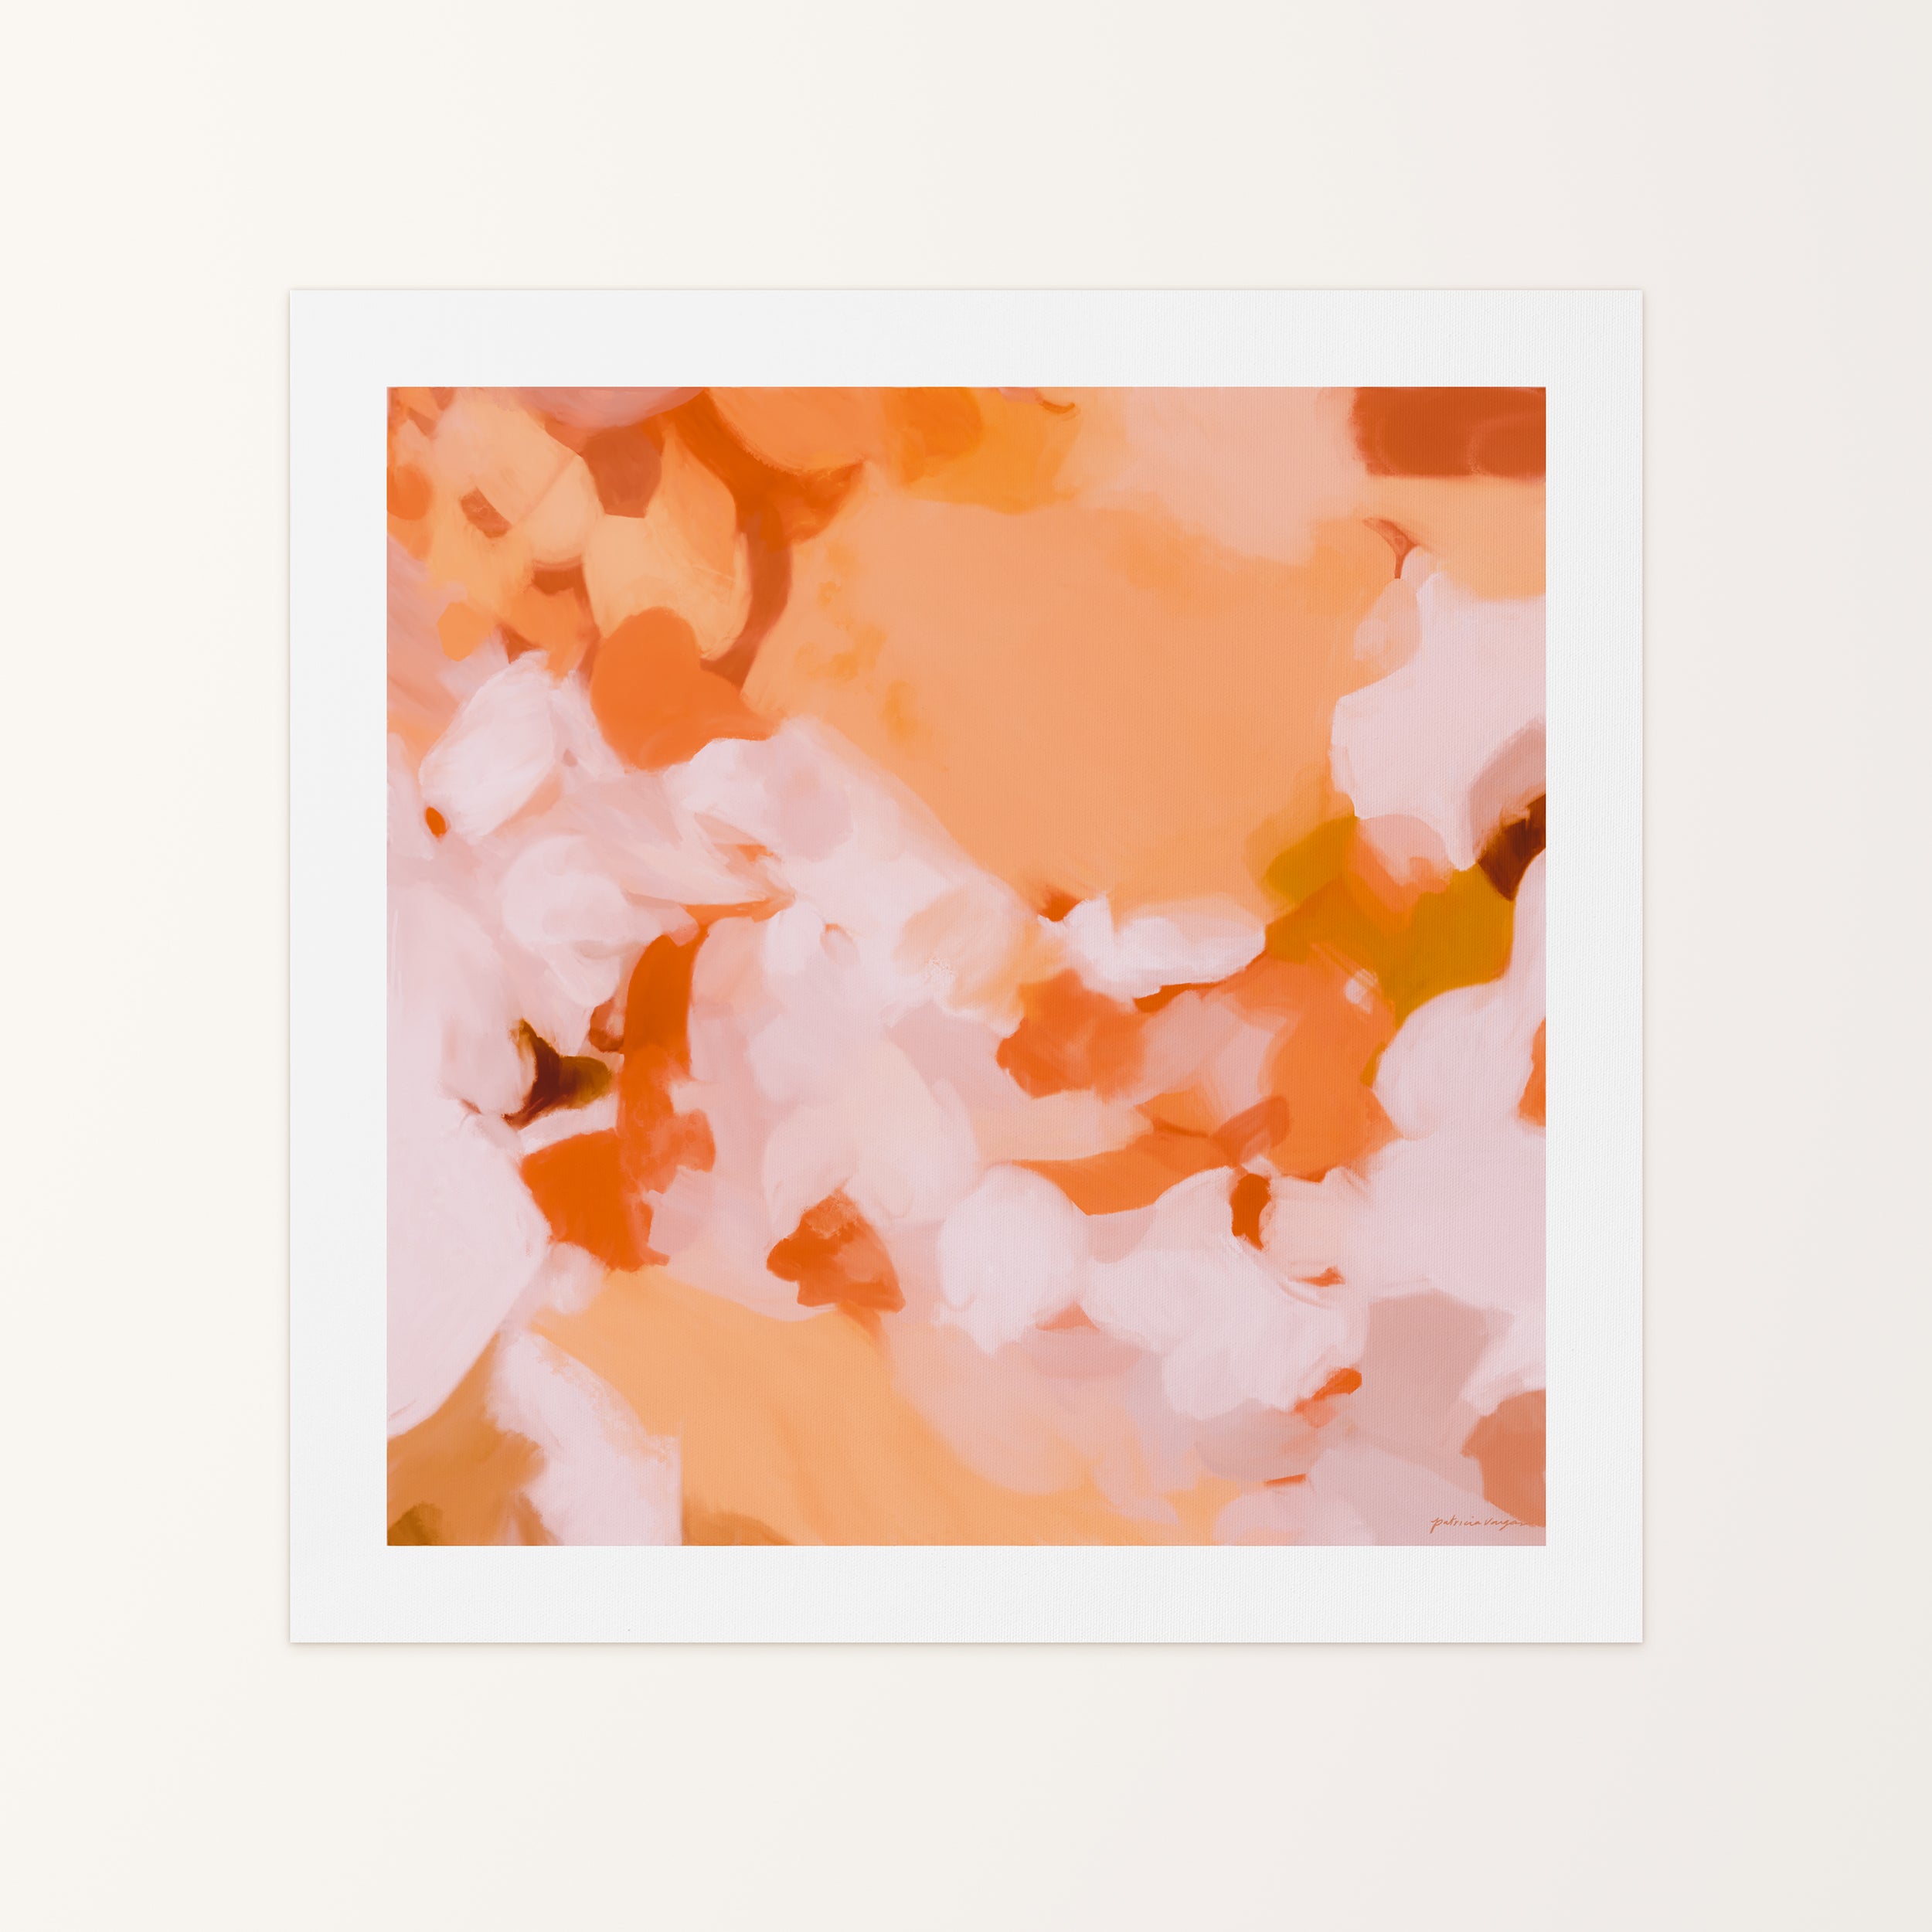 Clementine, orange and pink colorful abstract canvas wall art print by Parima Studio